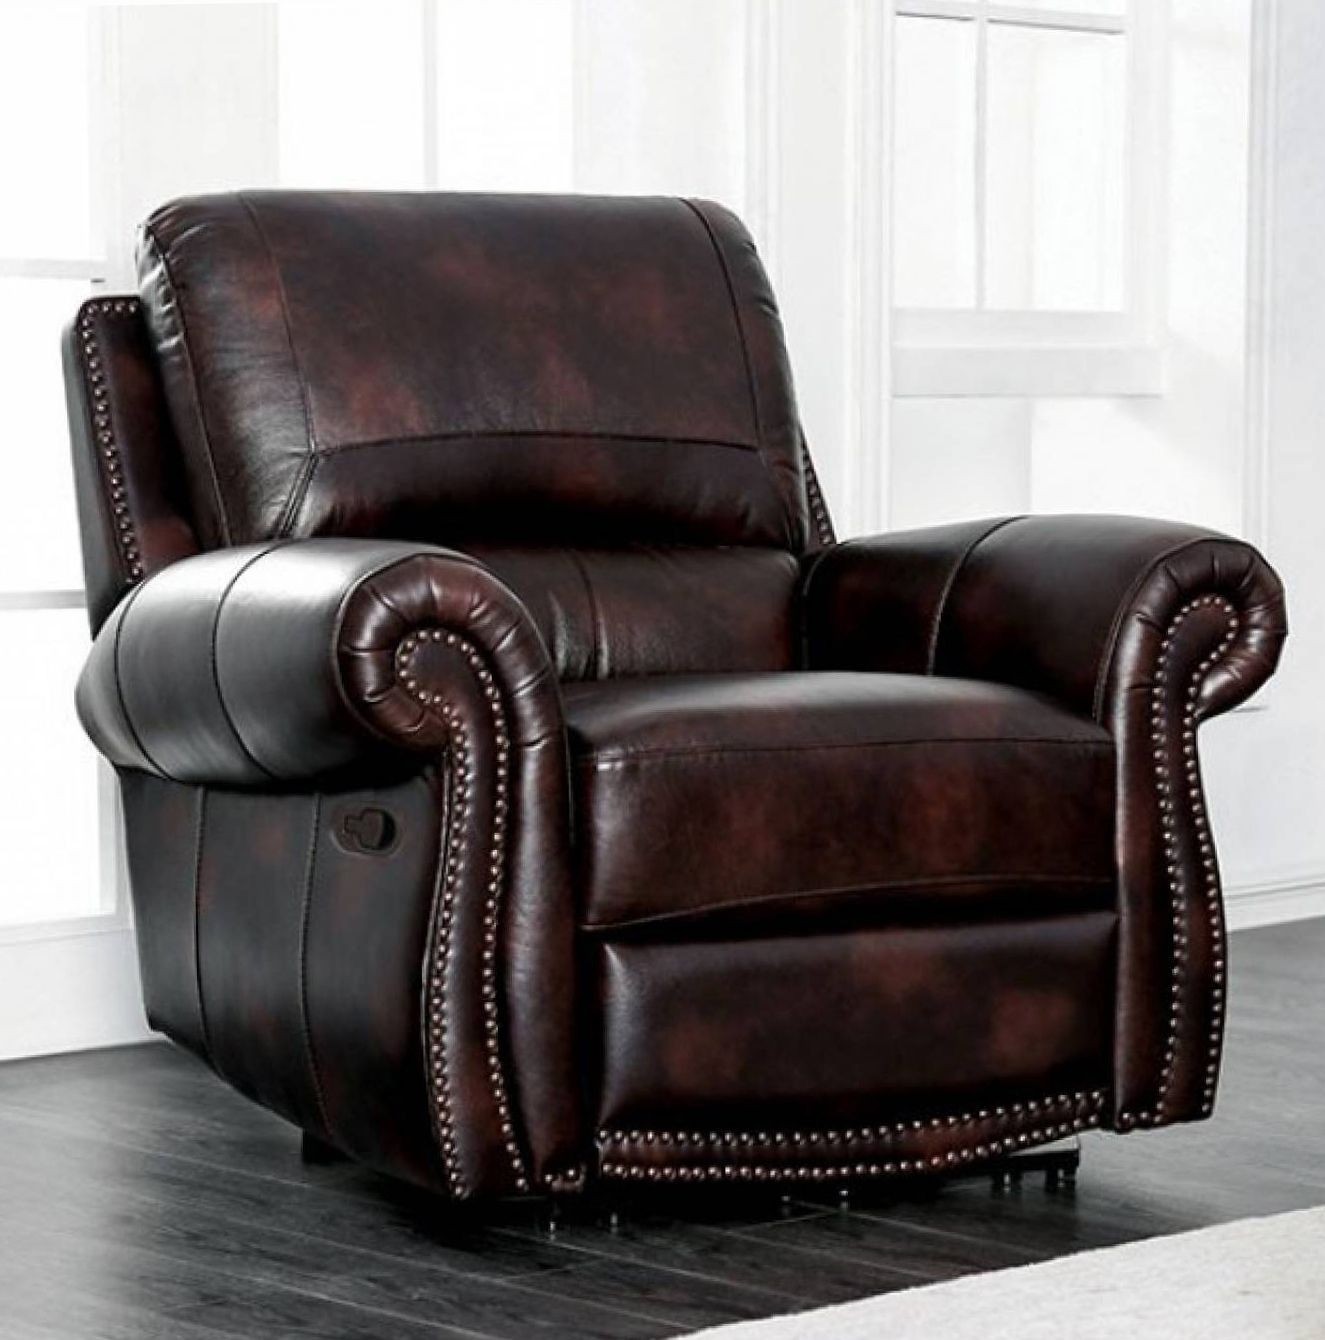 Brown top grain leather power reclining chair rolled arms